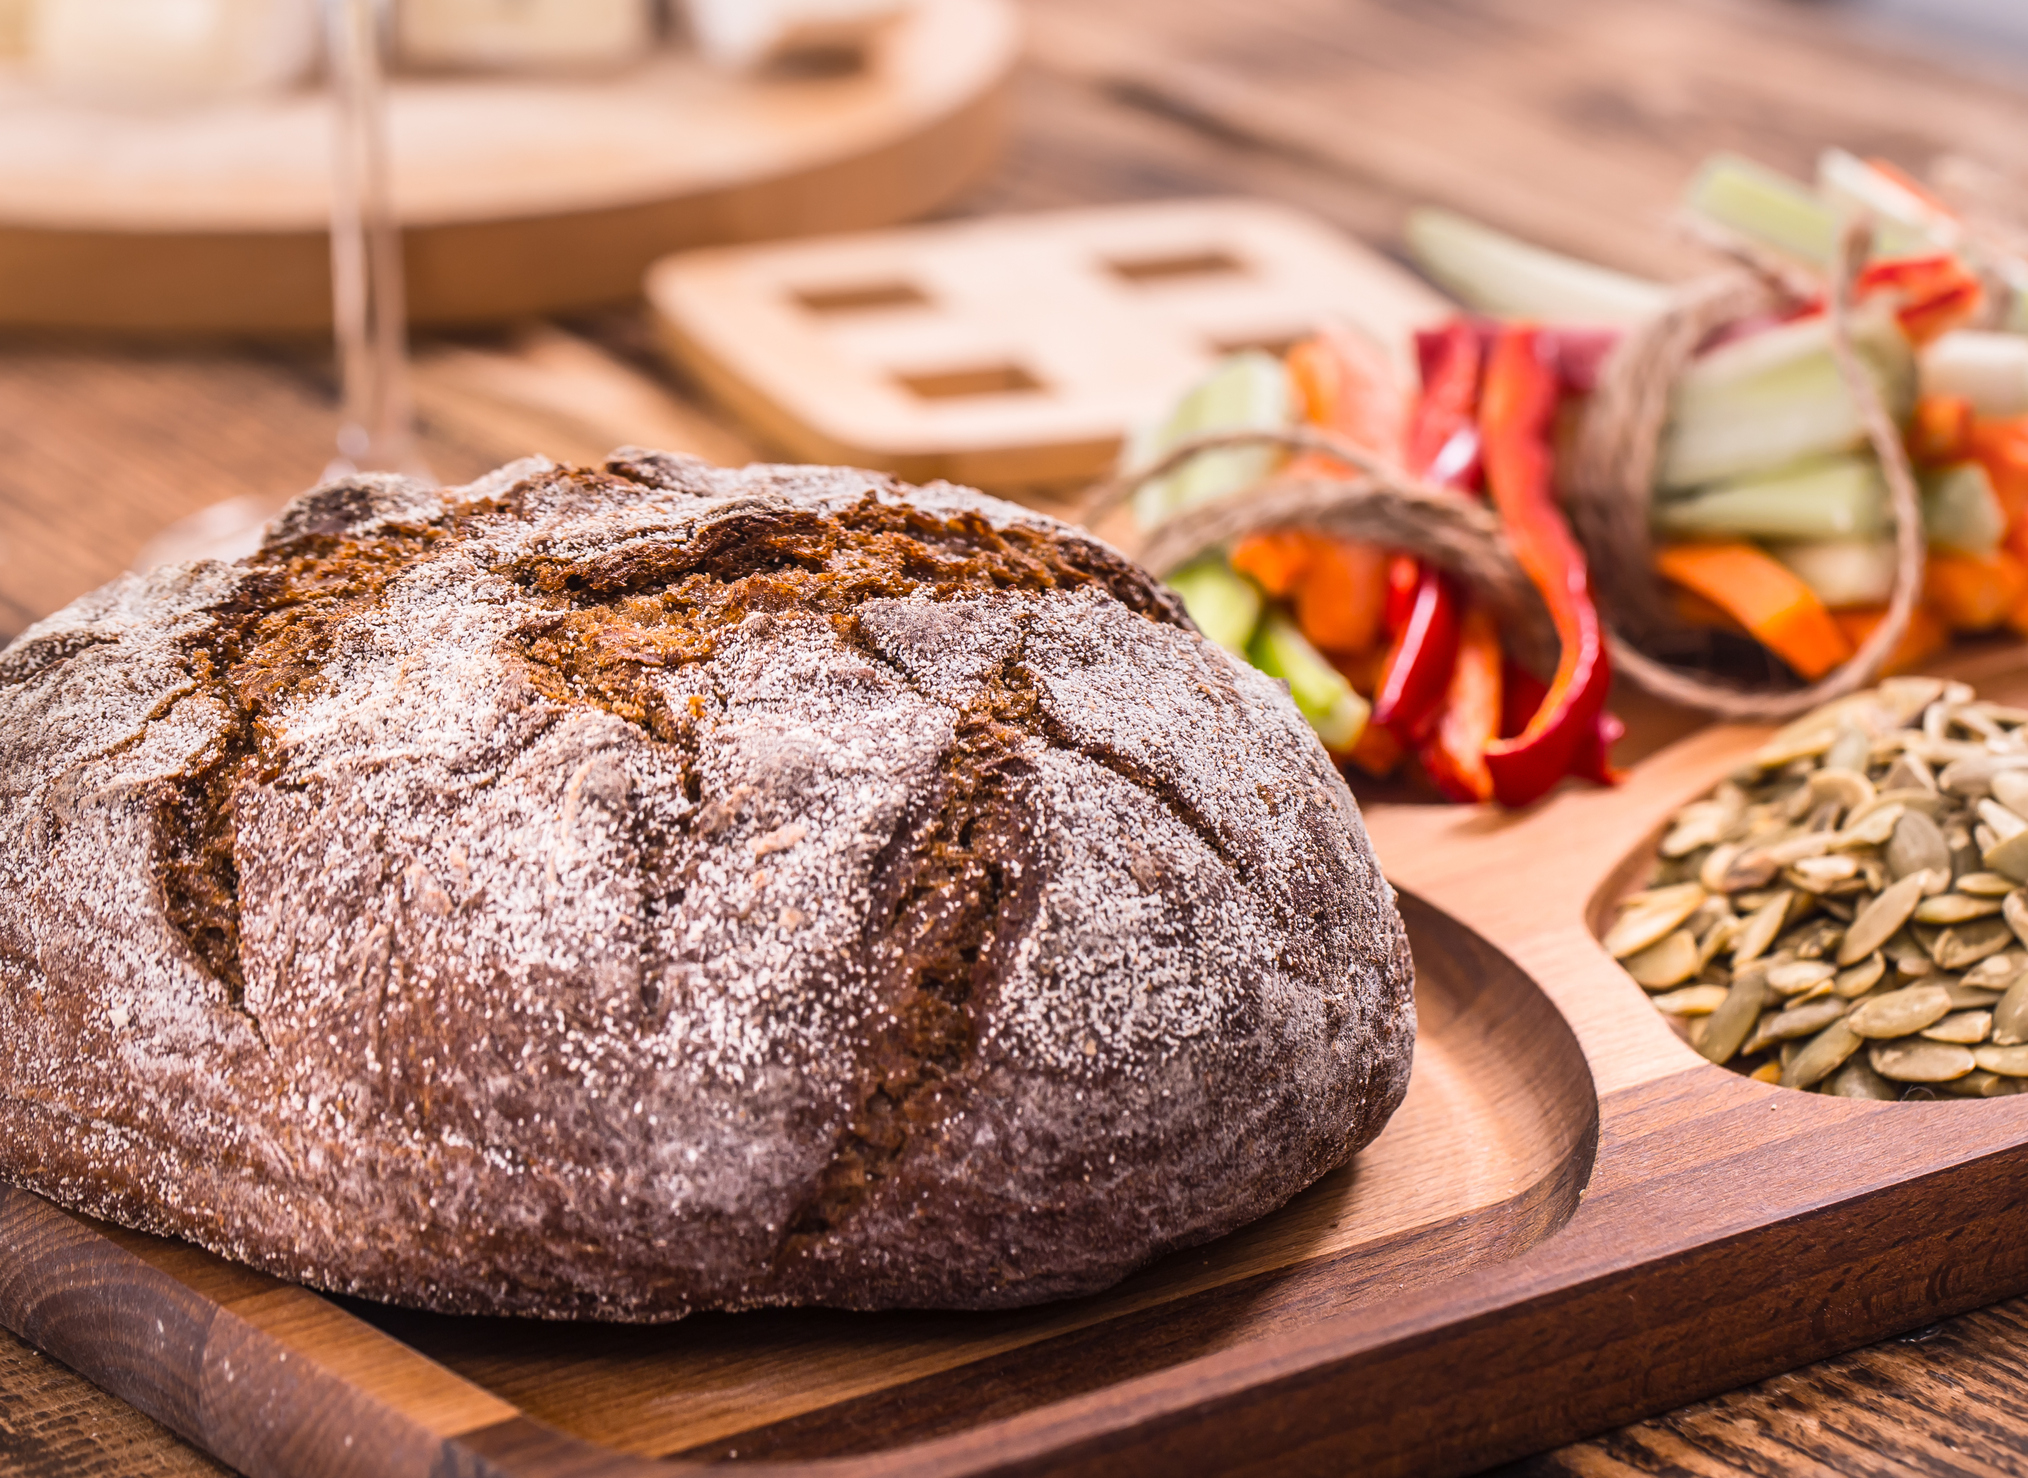 Why is sourdough a big deal?